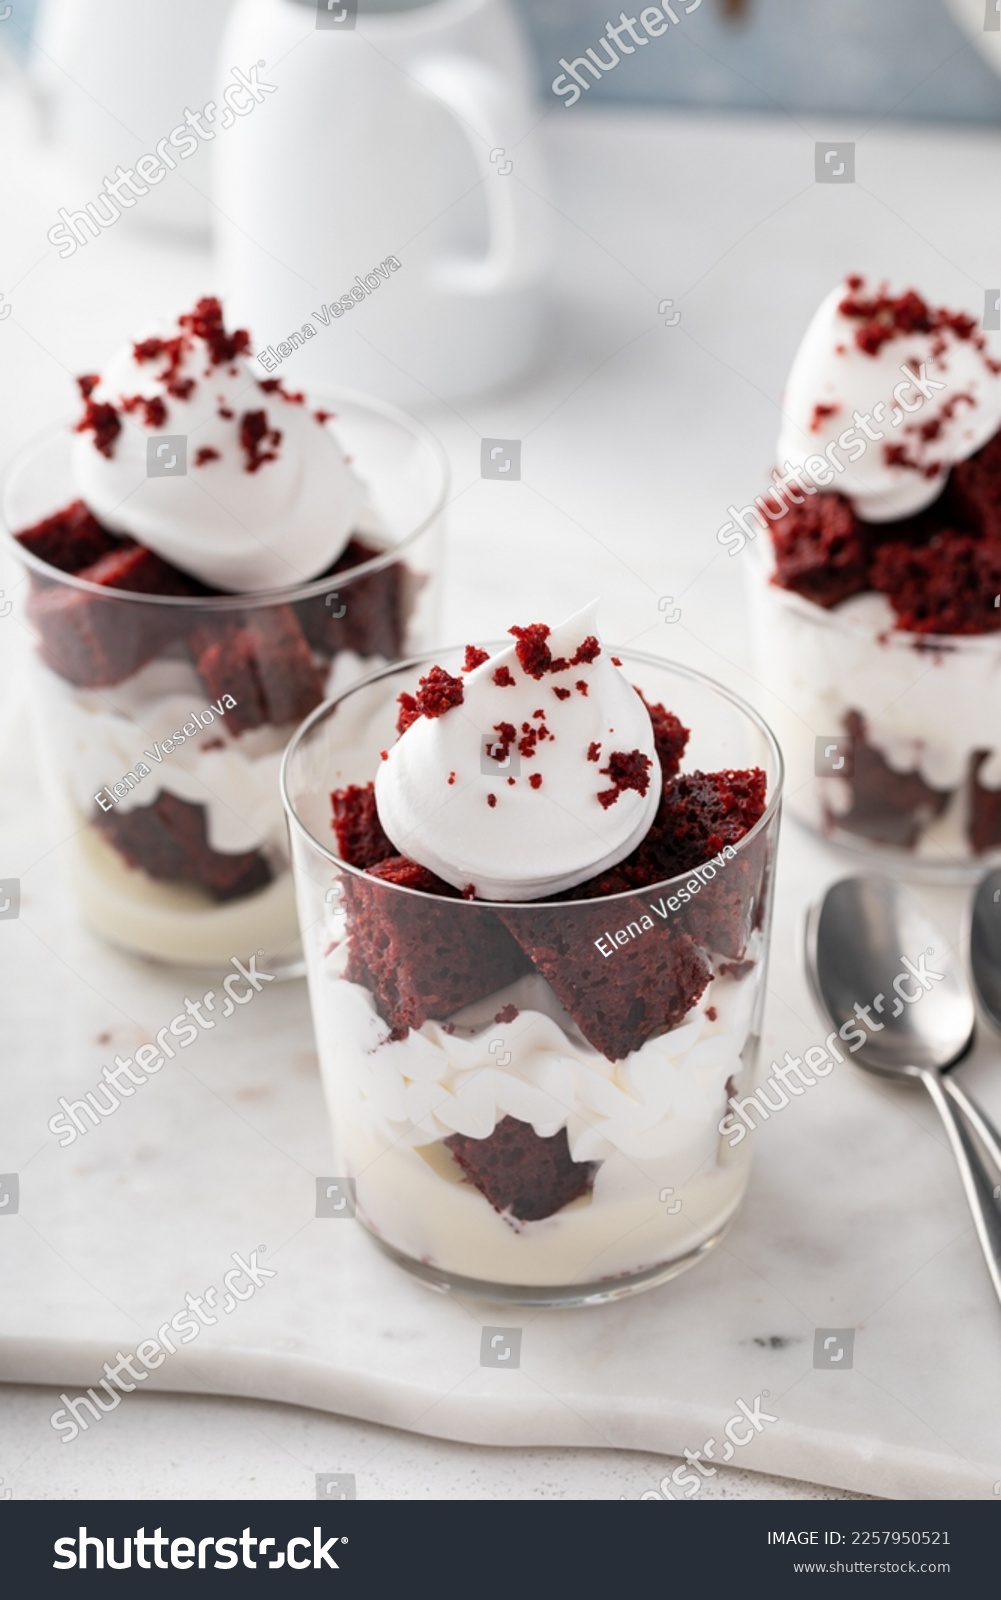 Red velvet trifle or parfait with cream cheese mousse and whipped cream, dessert in a glass idea #2257950521